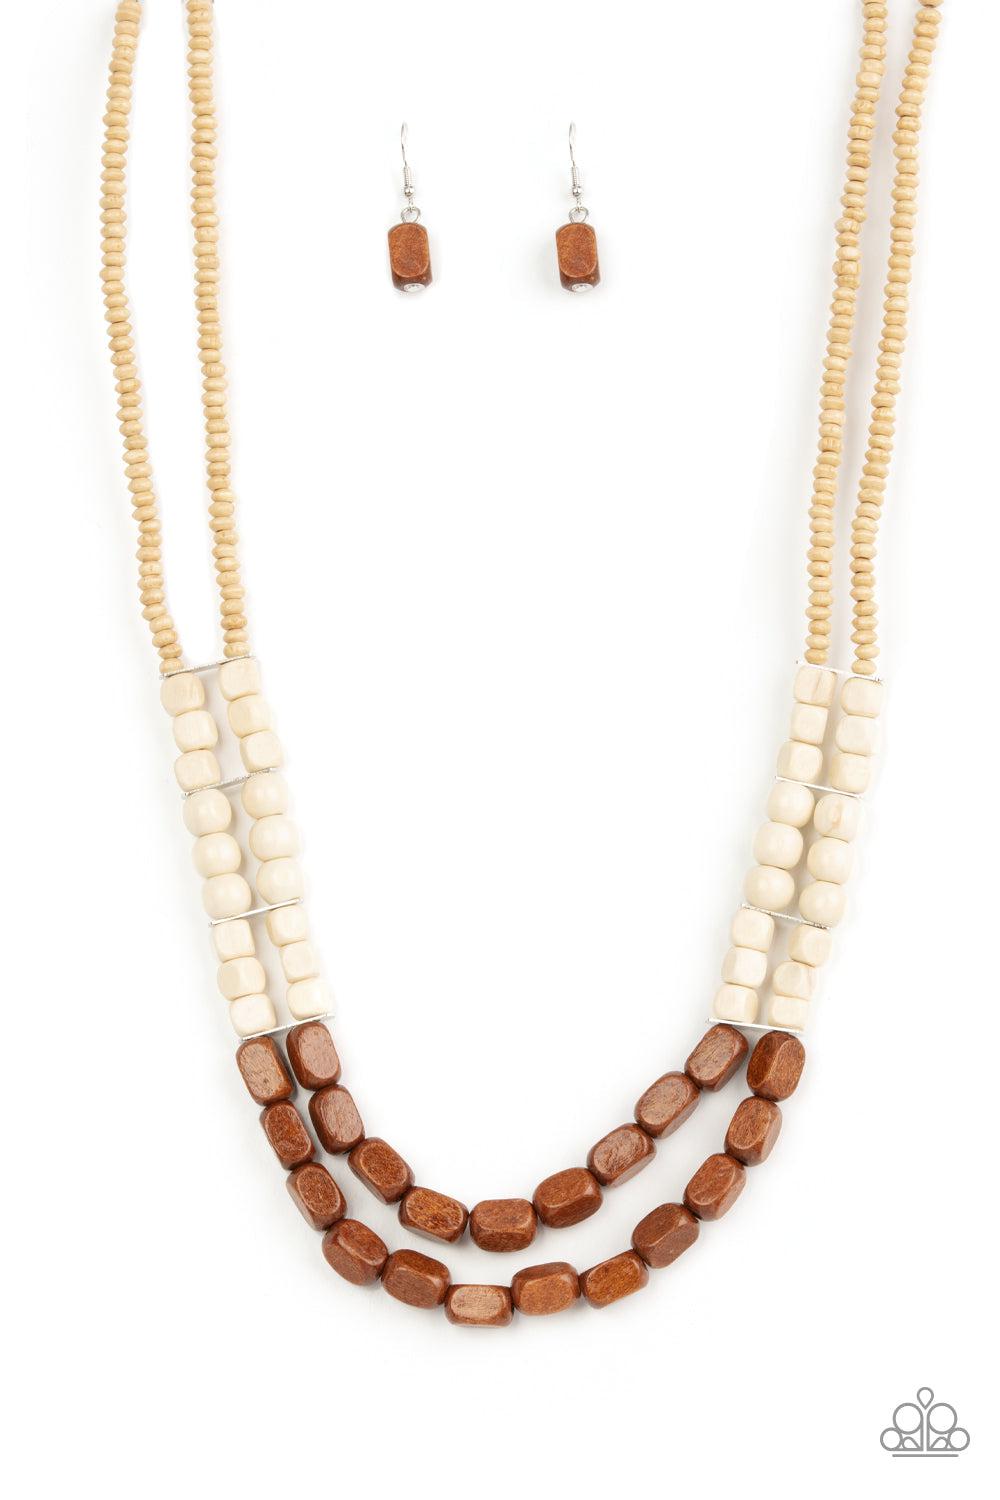 Bermuda Bellhop Brown & White Wood Necklace - Paparazzi Accessories- lightbox - CarasShop.com - $5 Jewelry by Cara Jewels